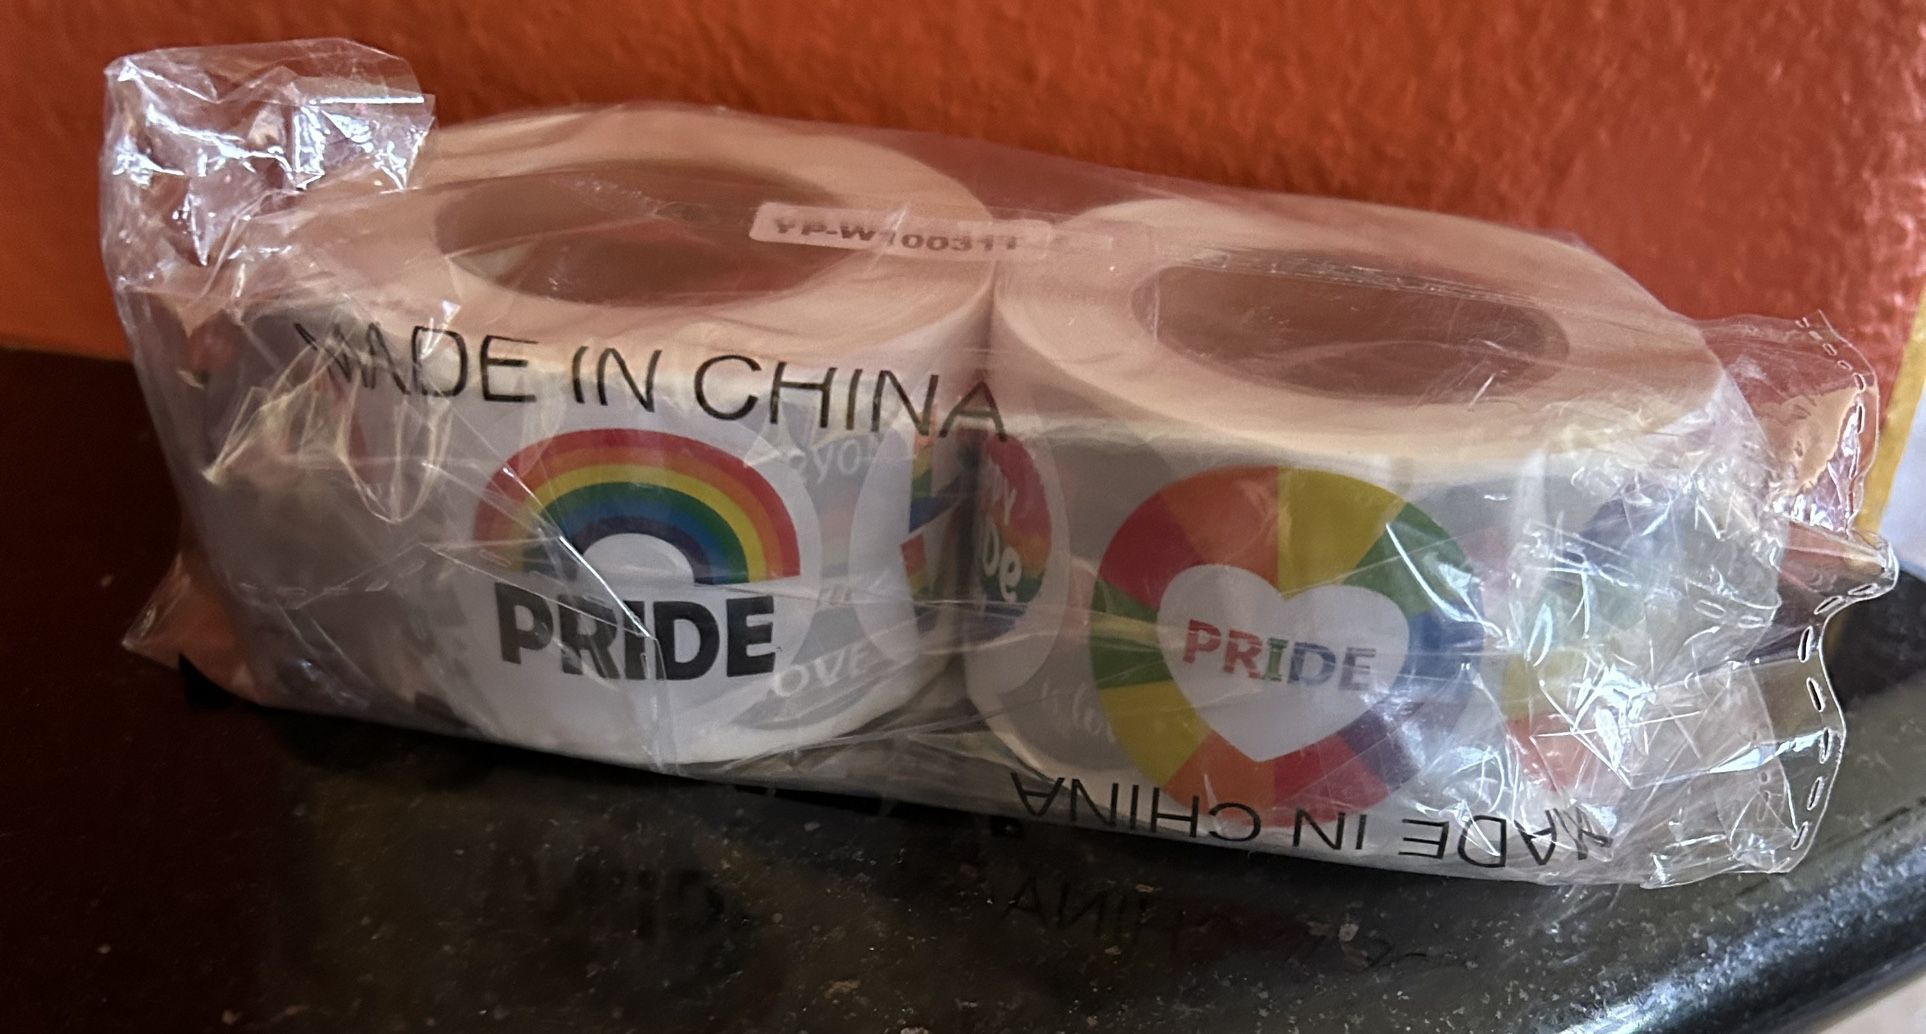 New 2 Rolls Of Pride Stickers - Pride Events Are Coming Up !